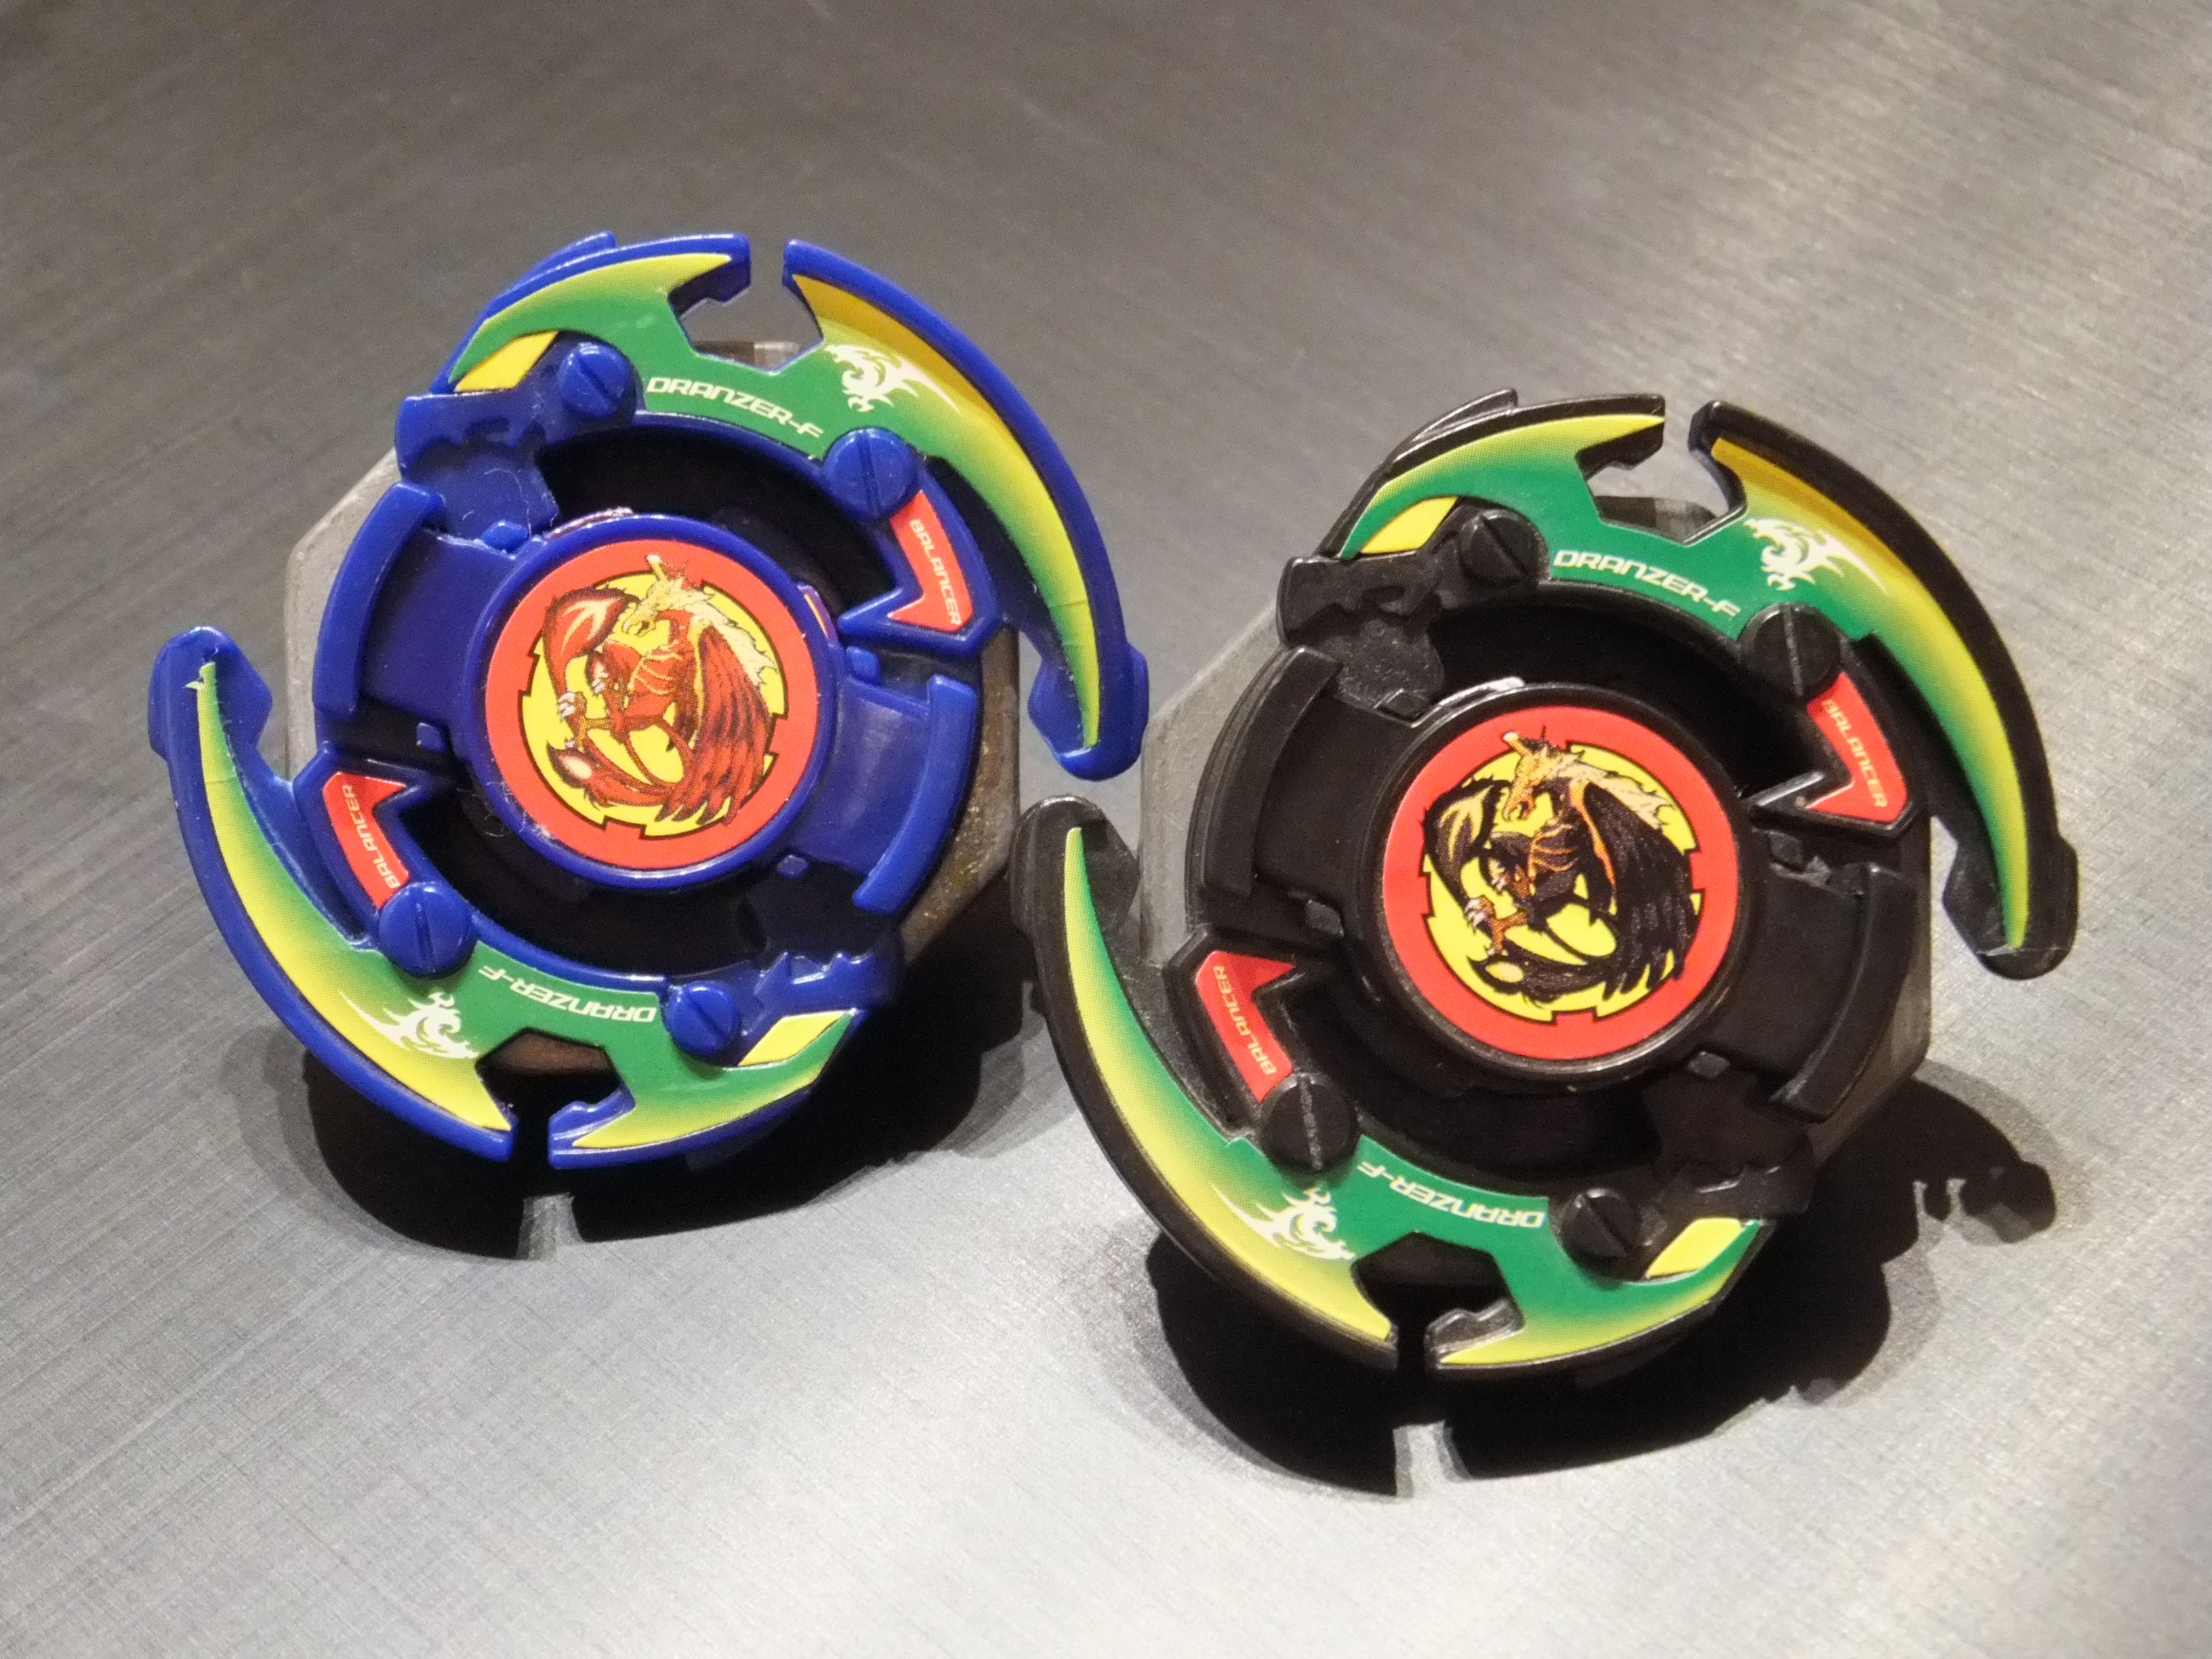 where to get beyblades in stores